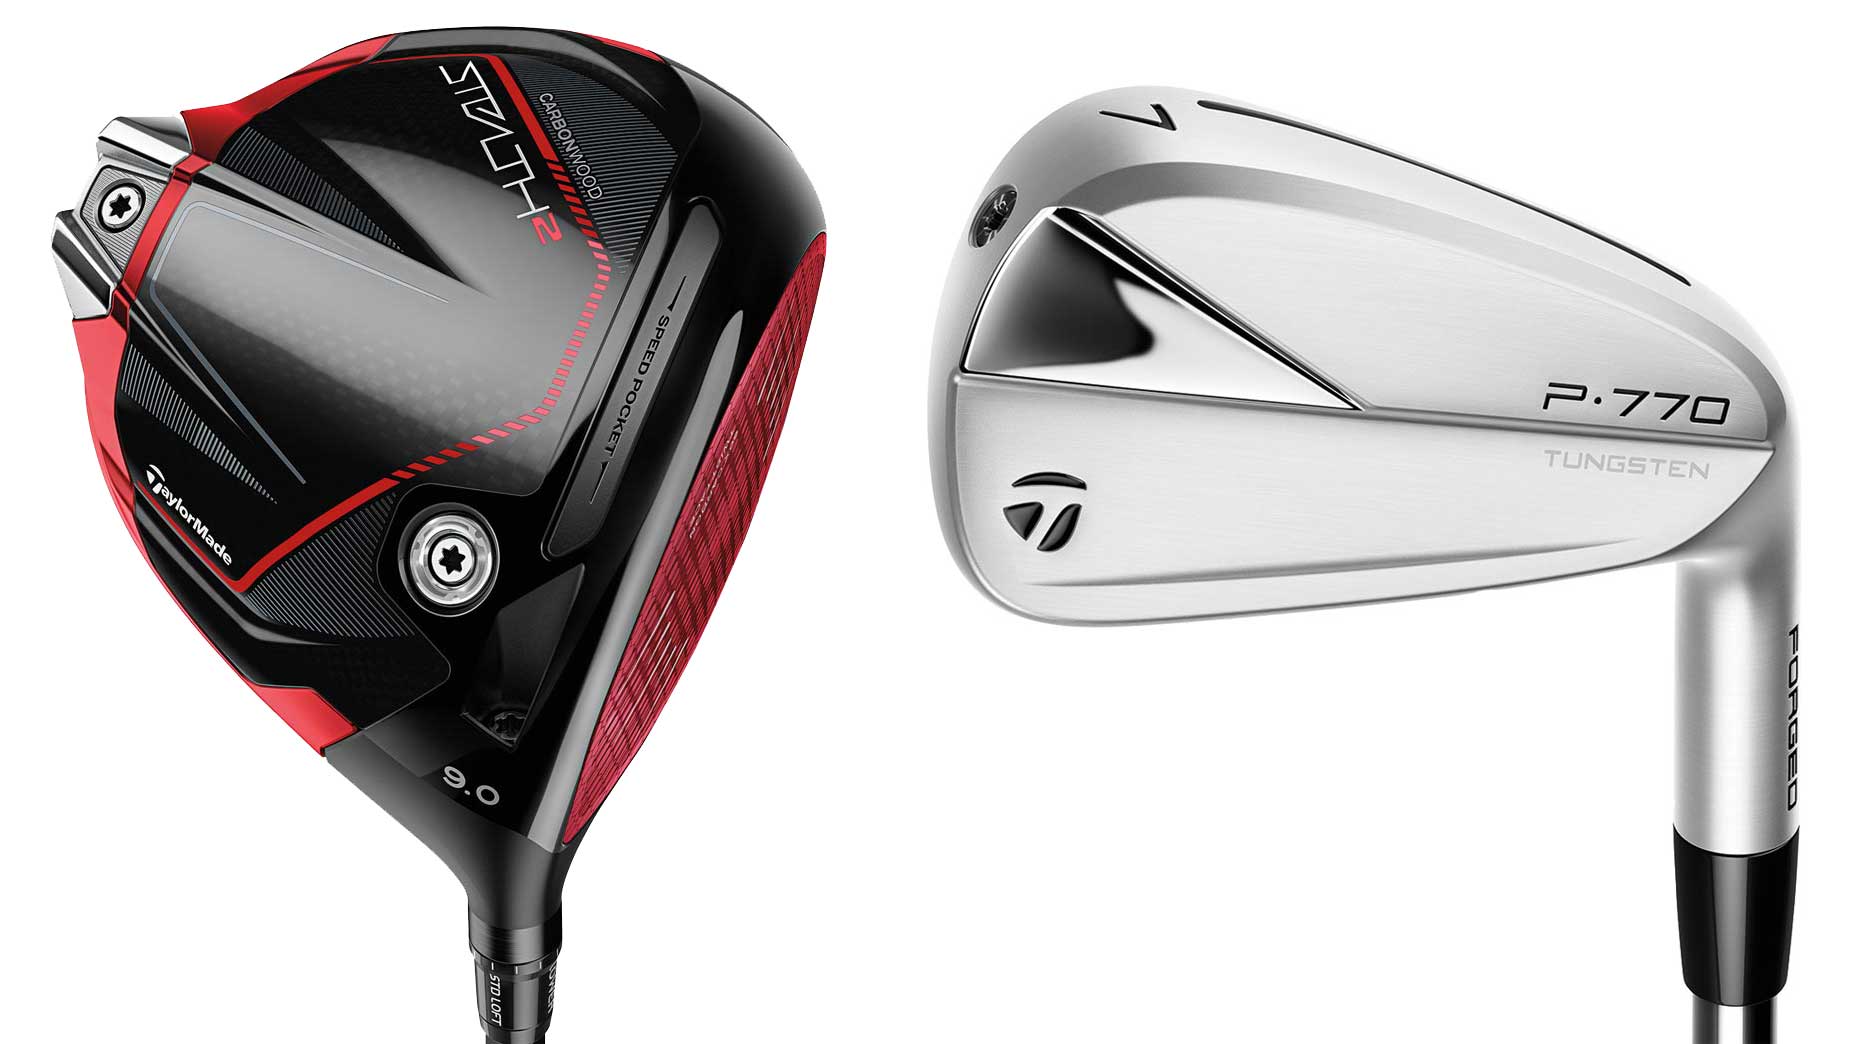 New TaylorMade golf clubs for 2023 (drivers, irons, wedges, putters)